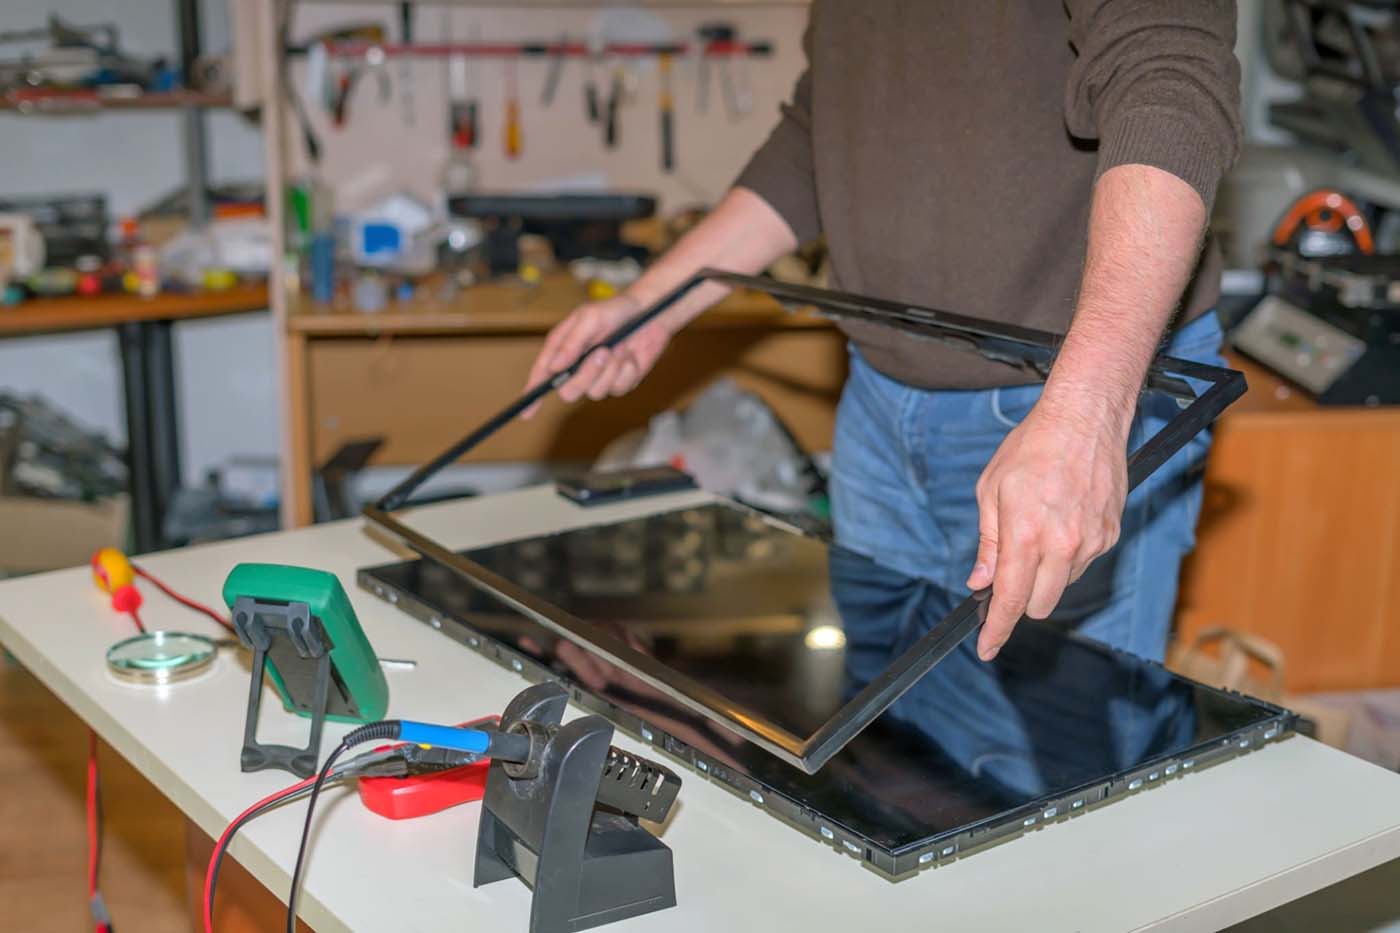 LG TV Repairs: How to Find the Right Technician and Avoid Scams